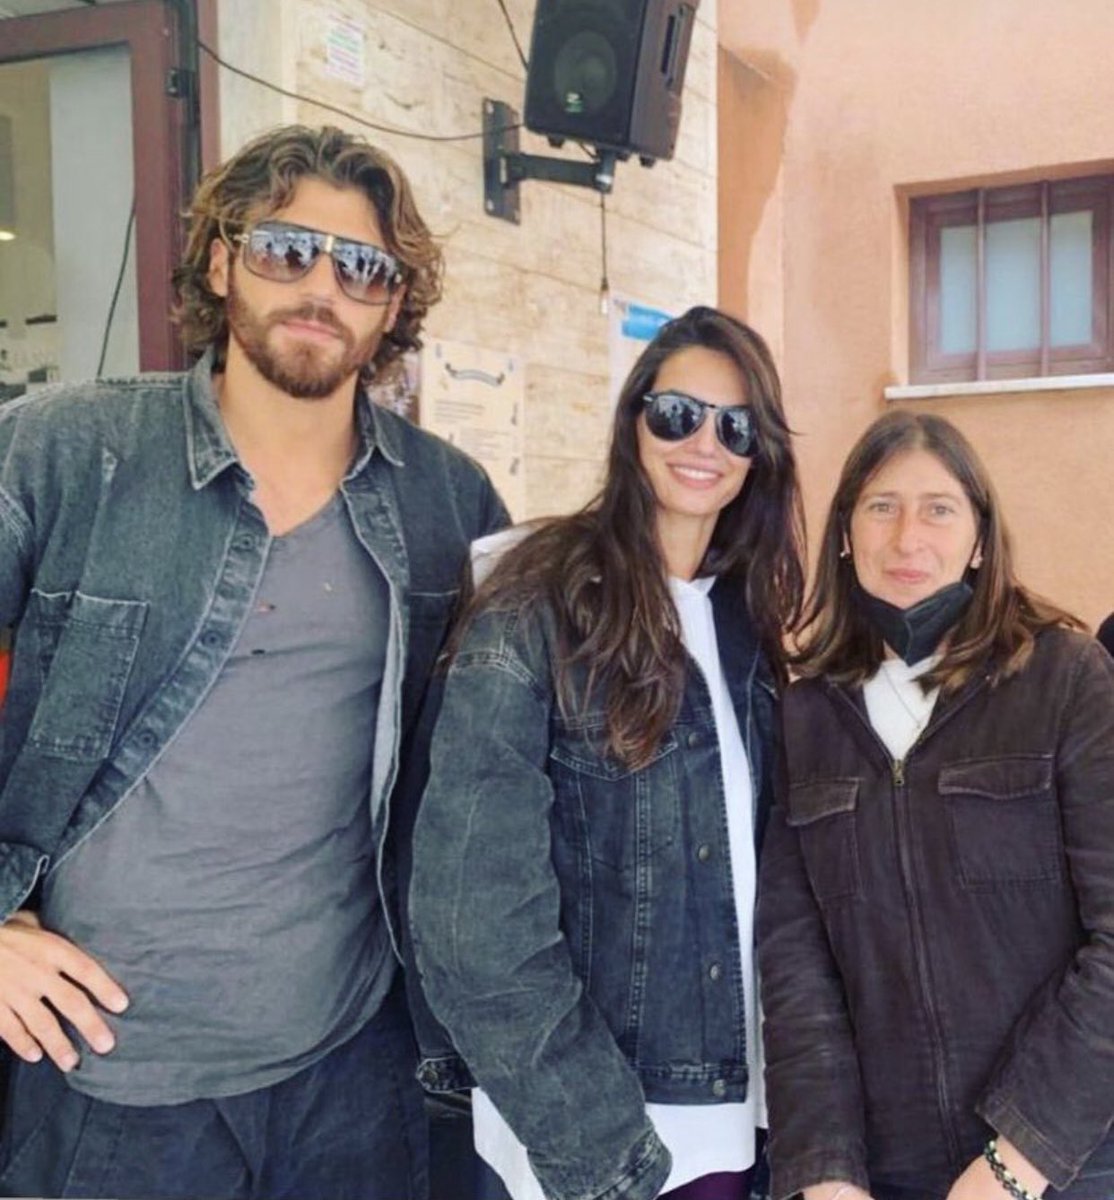 Break time from shooting 🎥❤️ #CanYaman with #FrancescaChillemi & team of #ViolaComeIlMare 💥💥 #LuxVide #FrancescoDemir